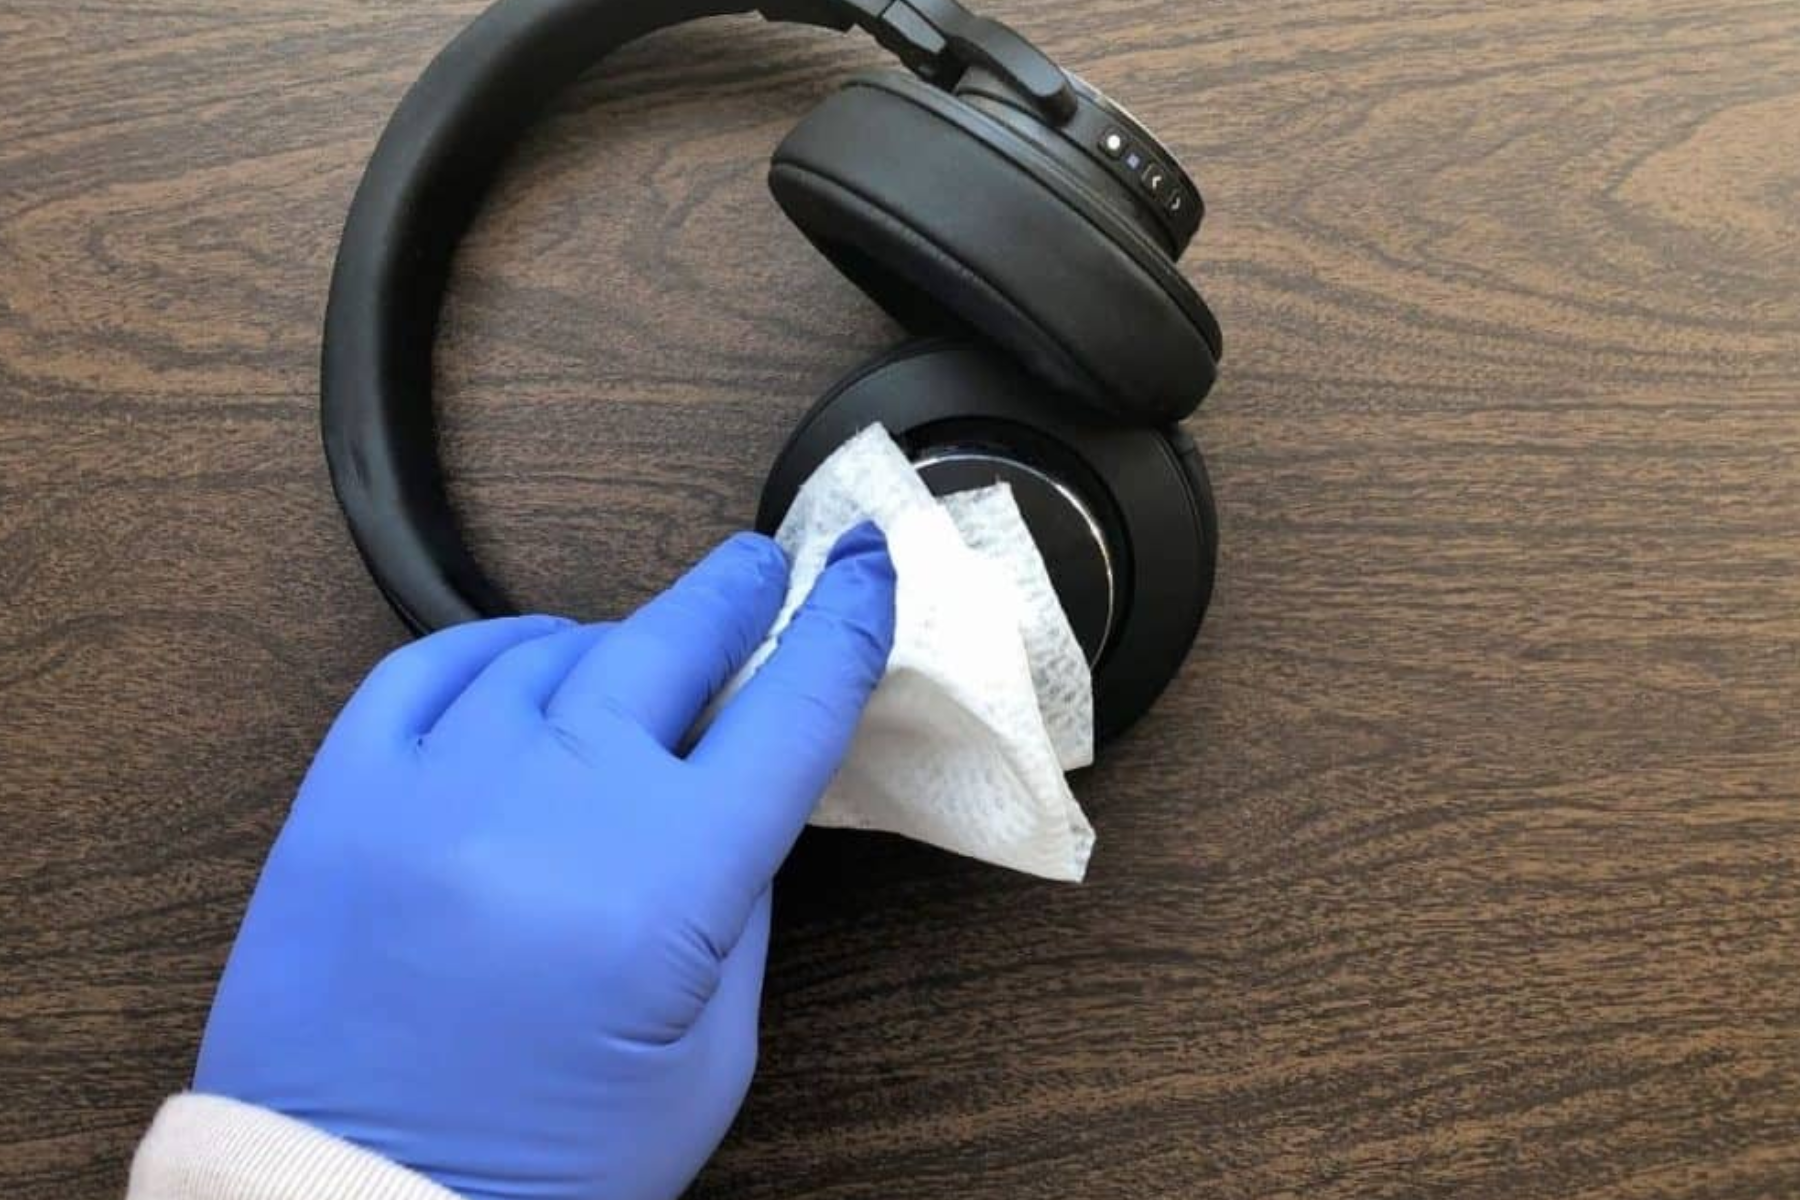 A gloved hand using a tissue to clean a headphone